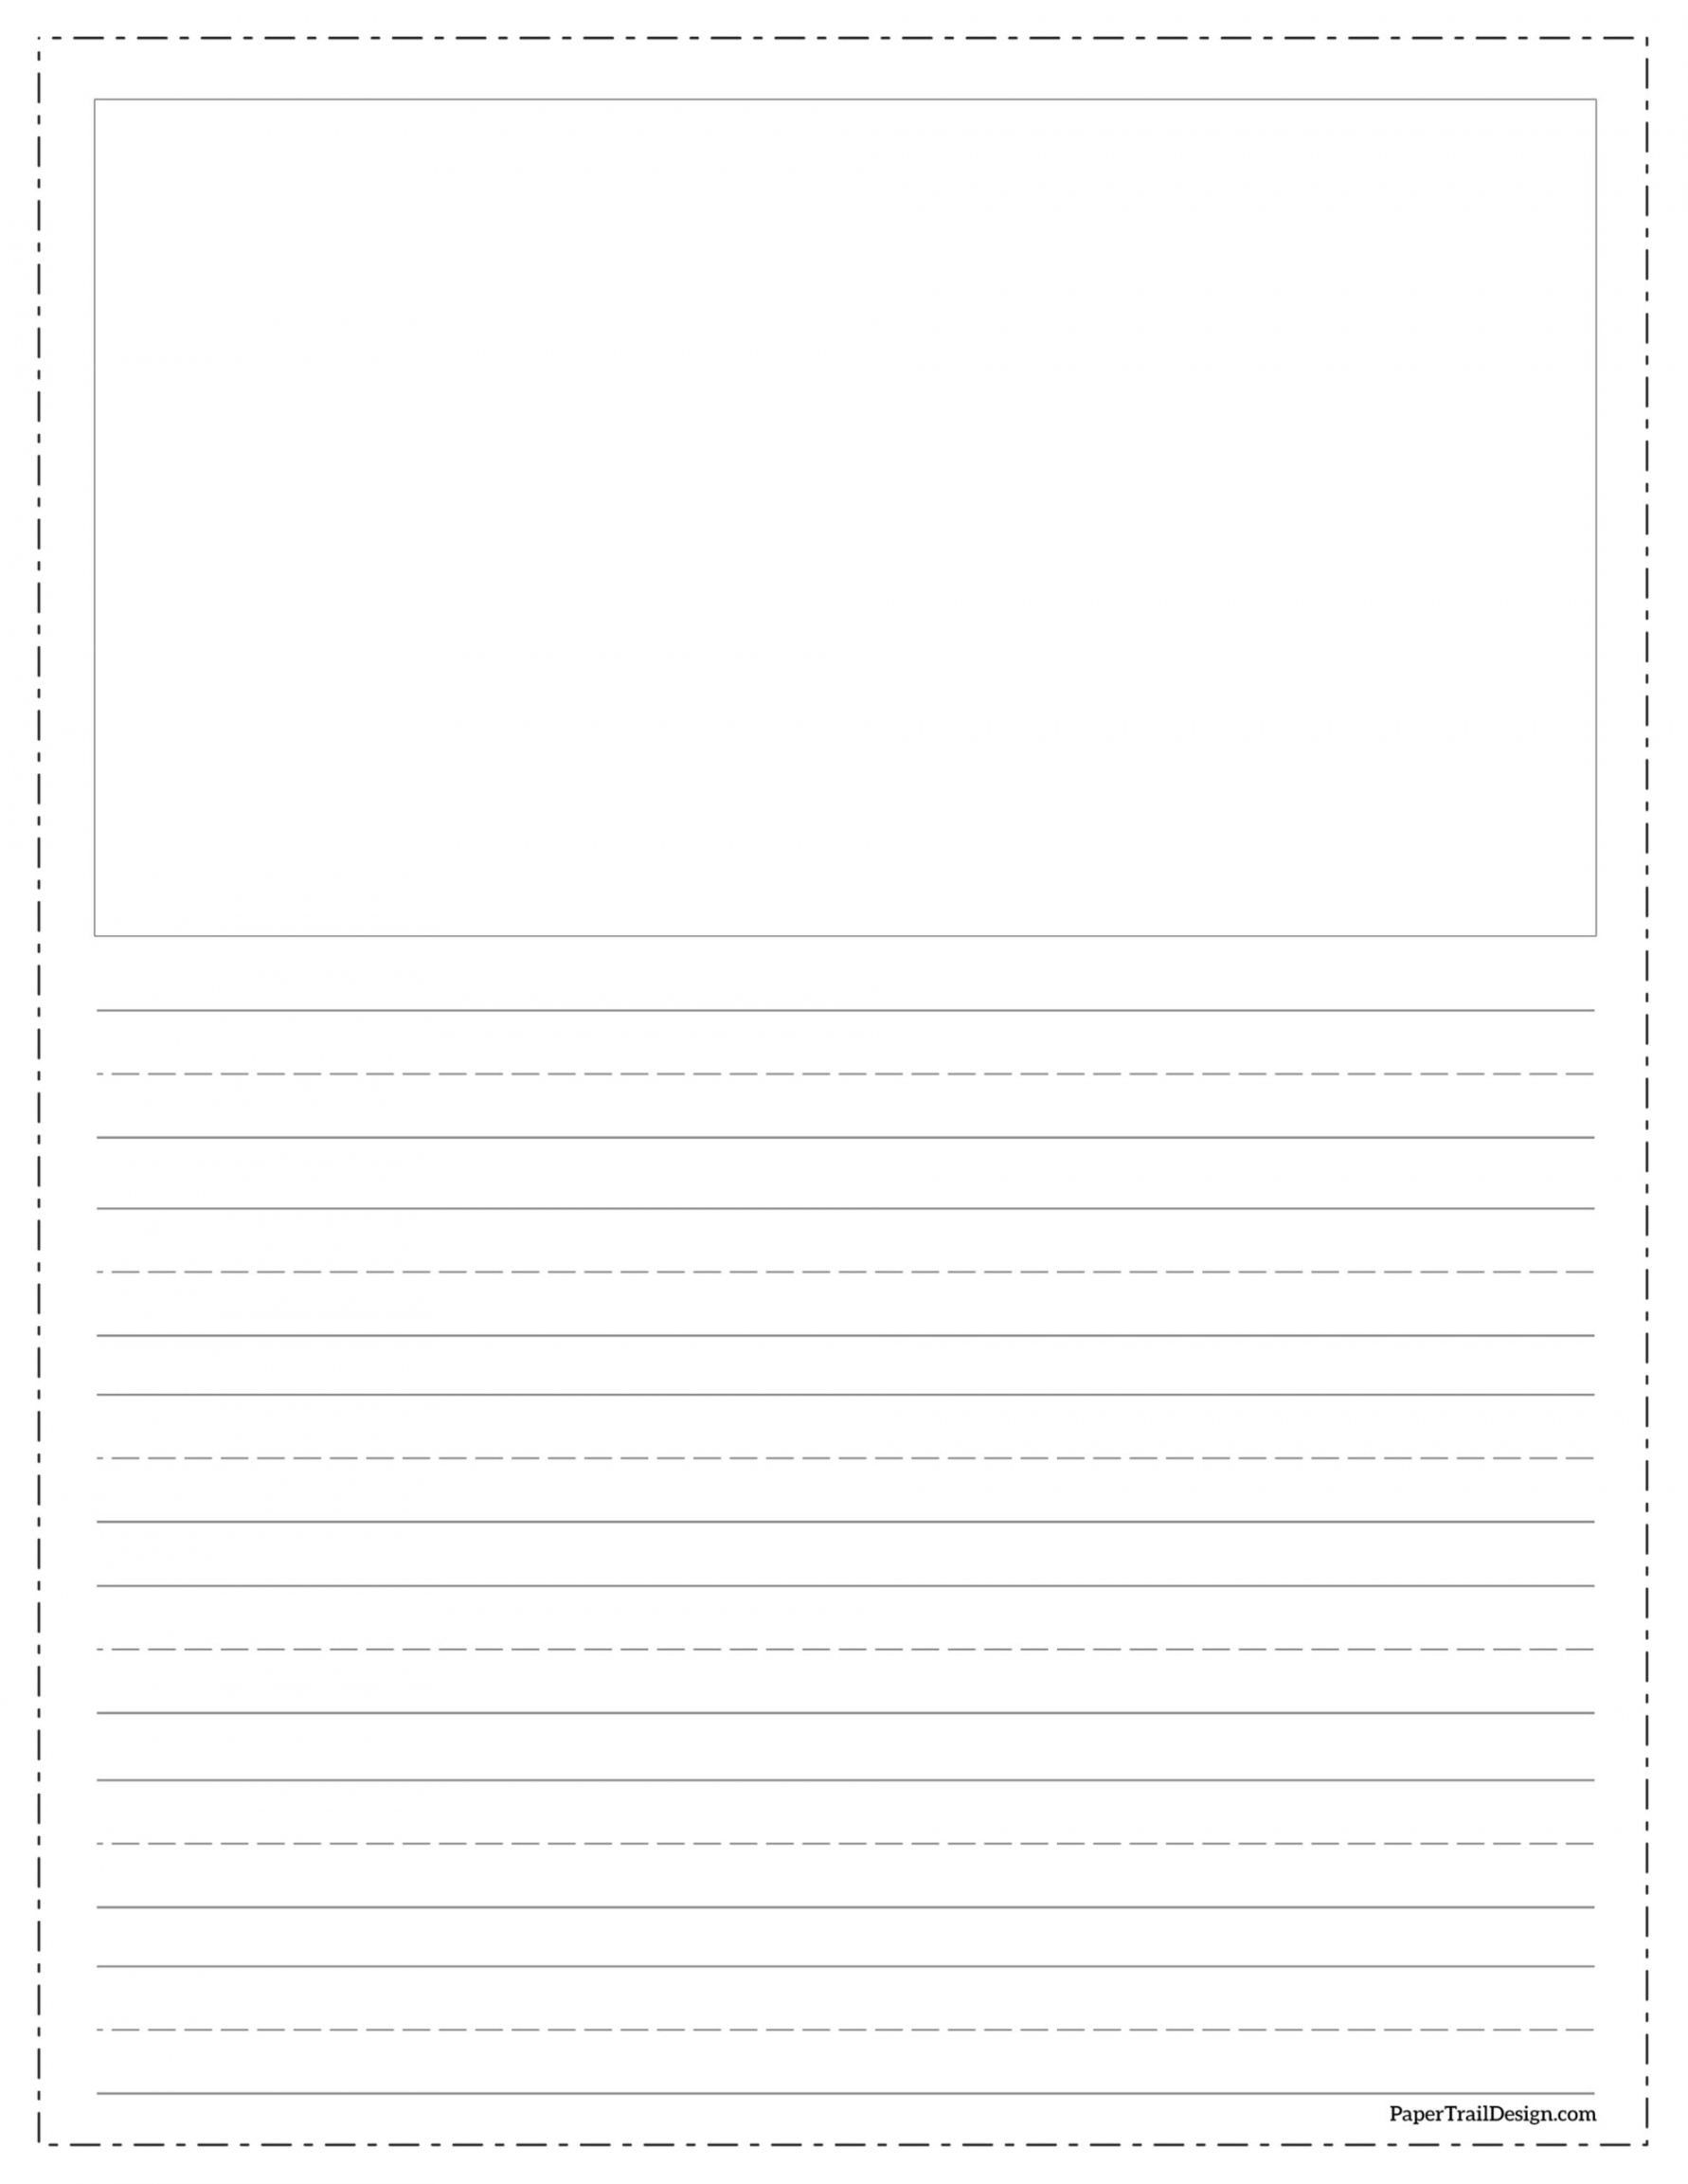 Free Printable Lined Writing Paper with Drawing Box - Paper Trail  - FREE Printables - Writing Paper With Picture Box